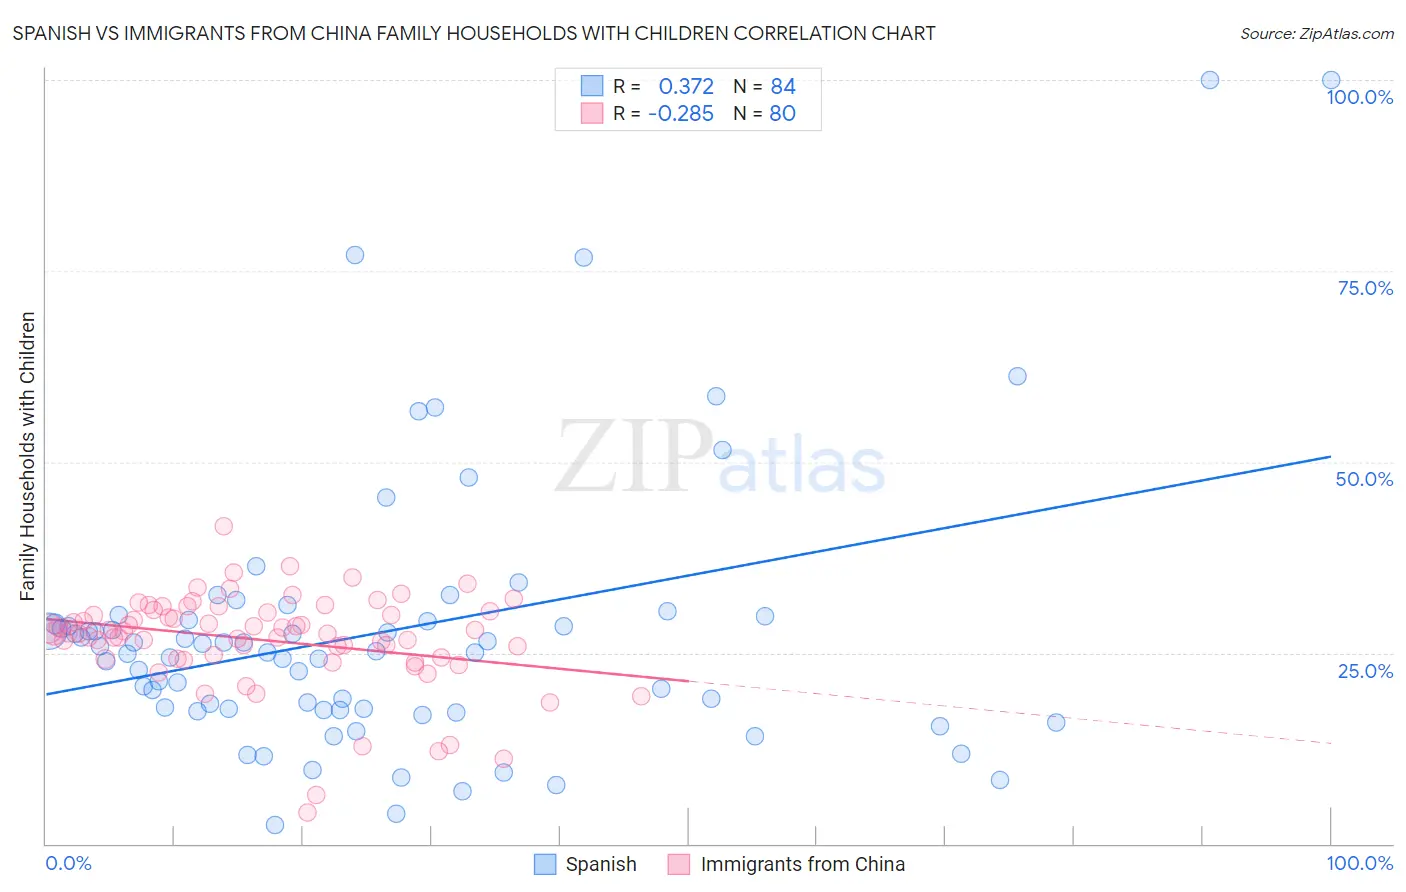 Spanish vs Immigrants from China Family Households with Children